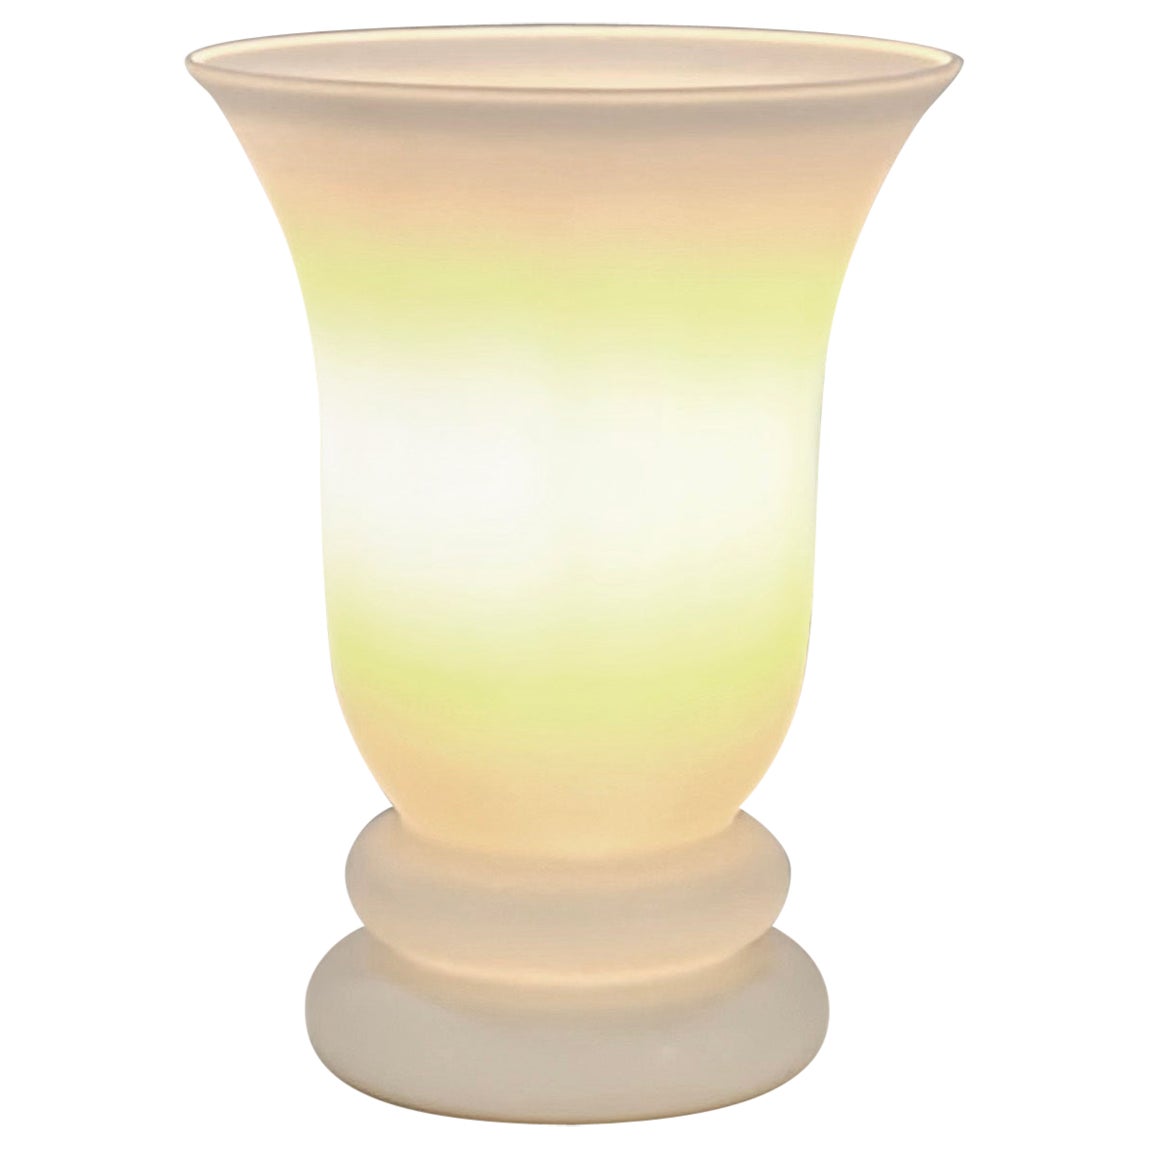 1990s Art Deco Style White Glass Uplighter - Torchiere Style